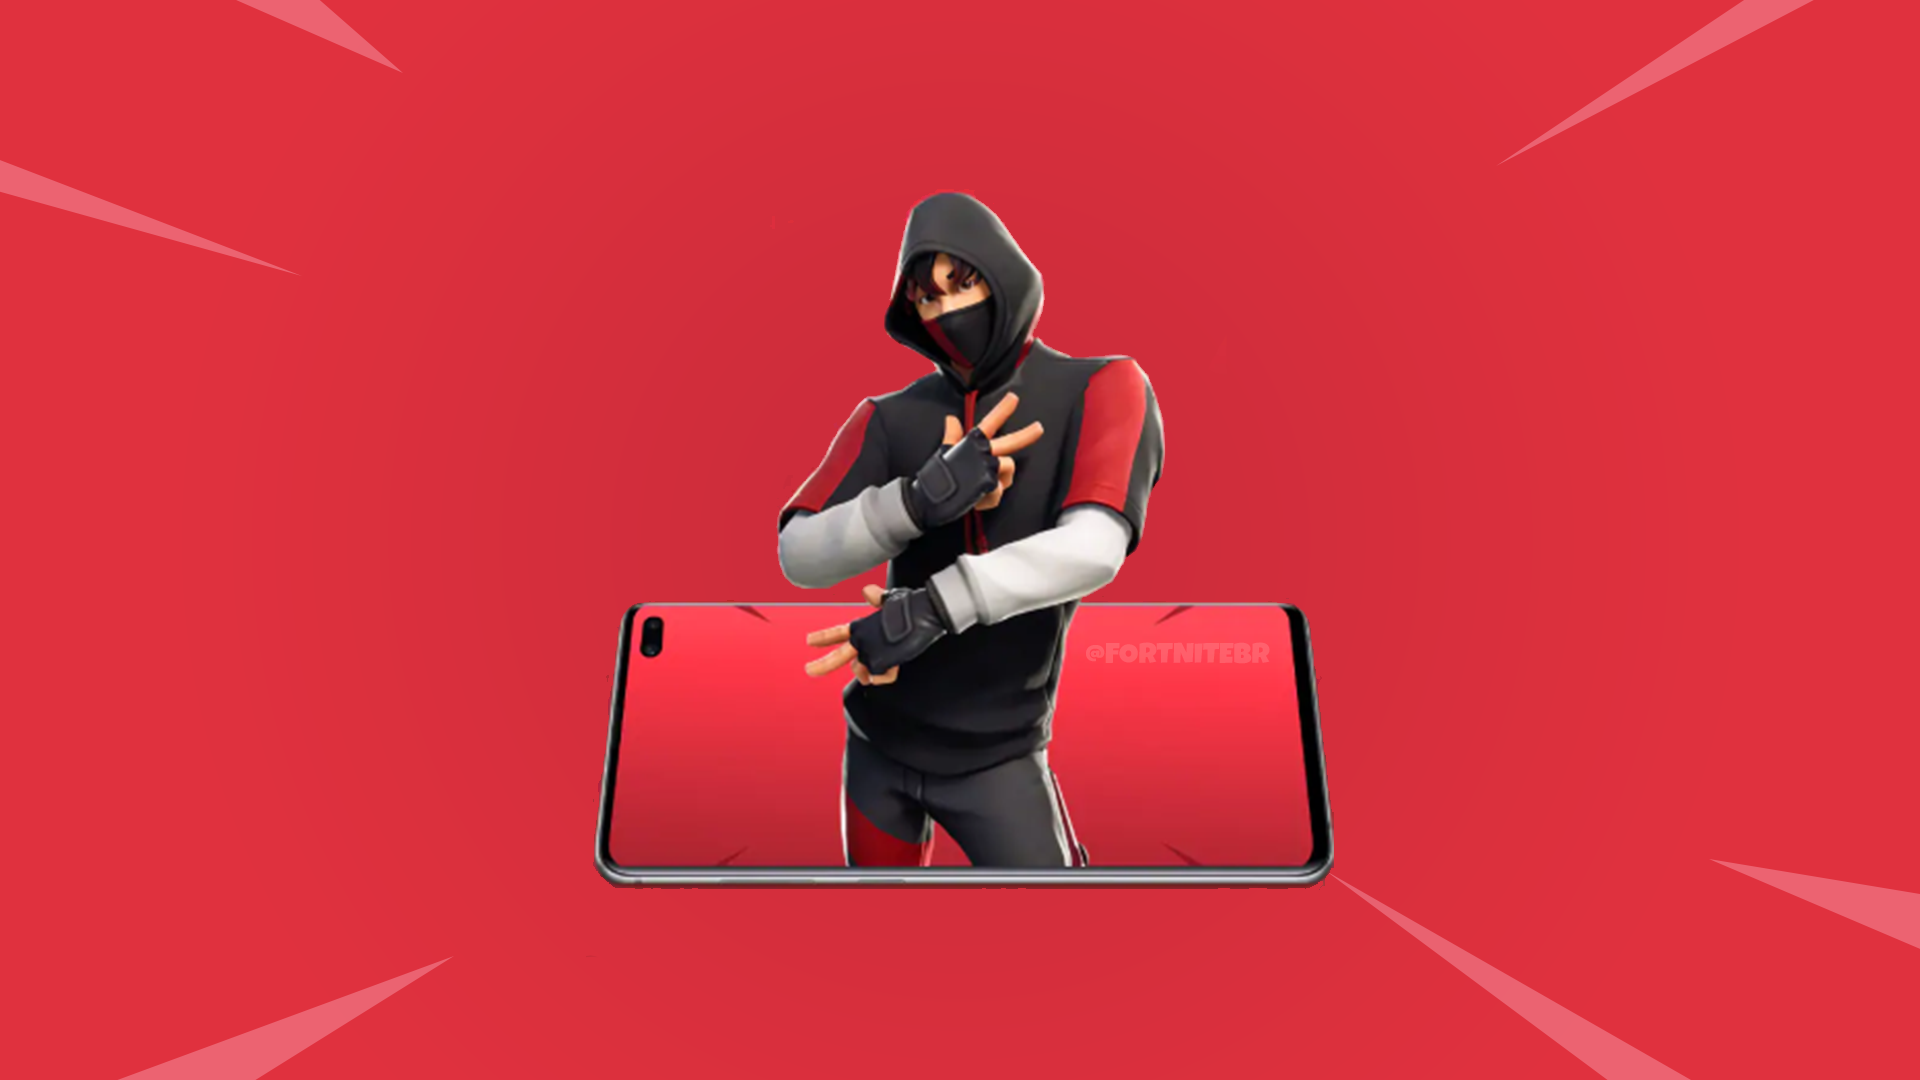 Fortnite Samsung Galaxy S10+ IKONIK Outfit - Release Date, Price, How to Redeem